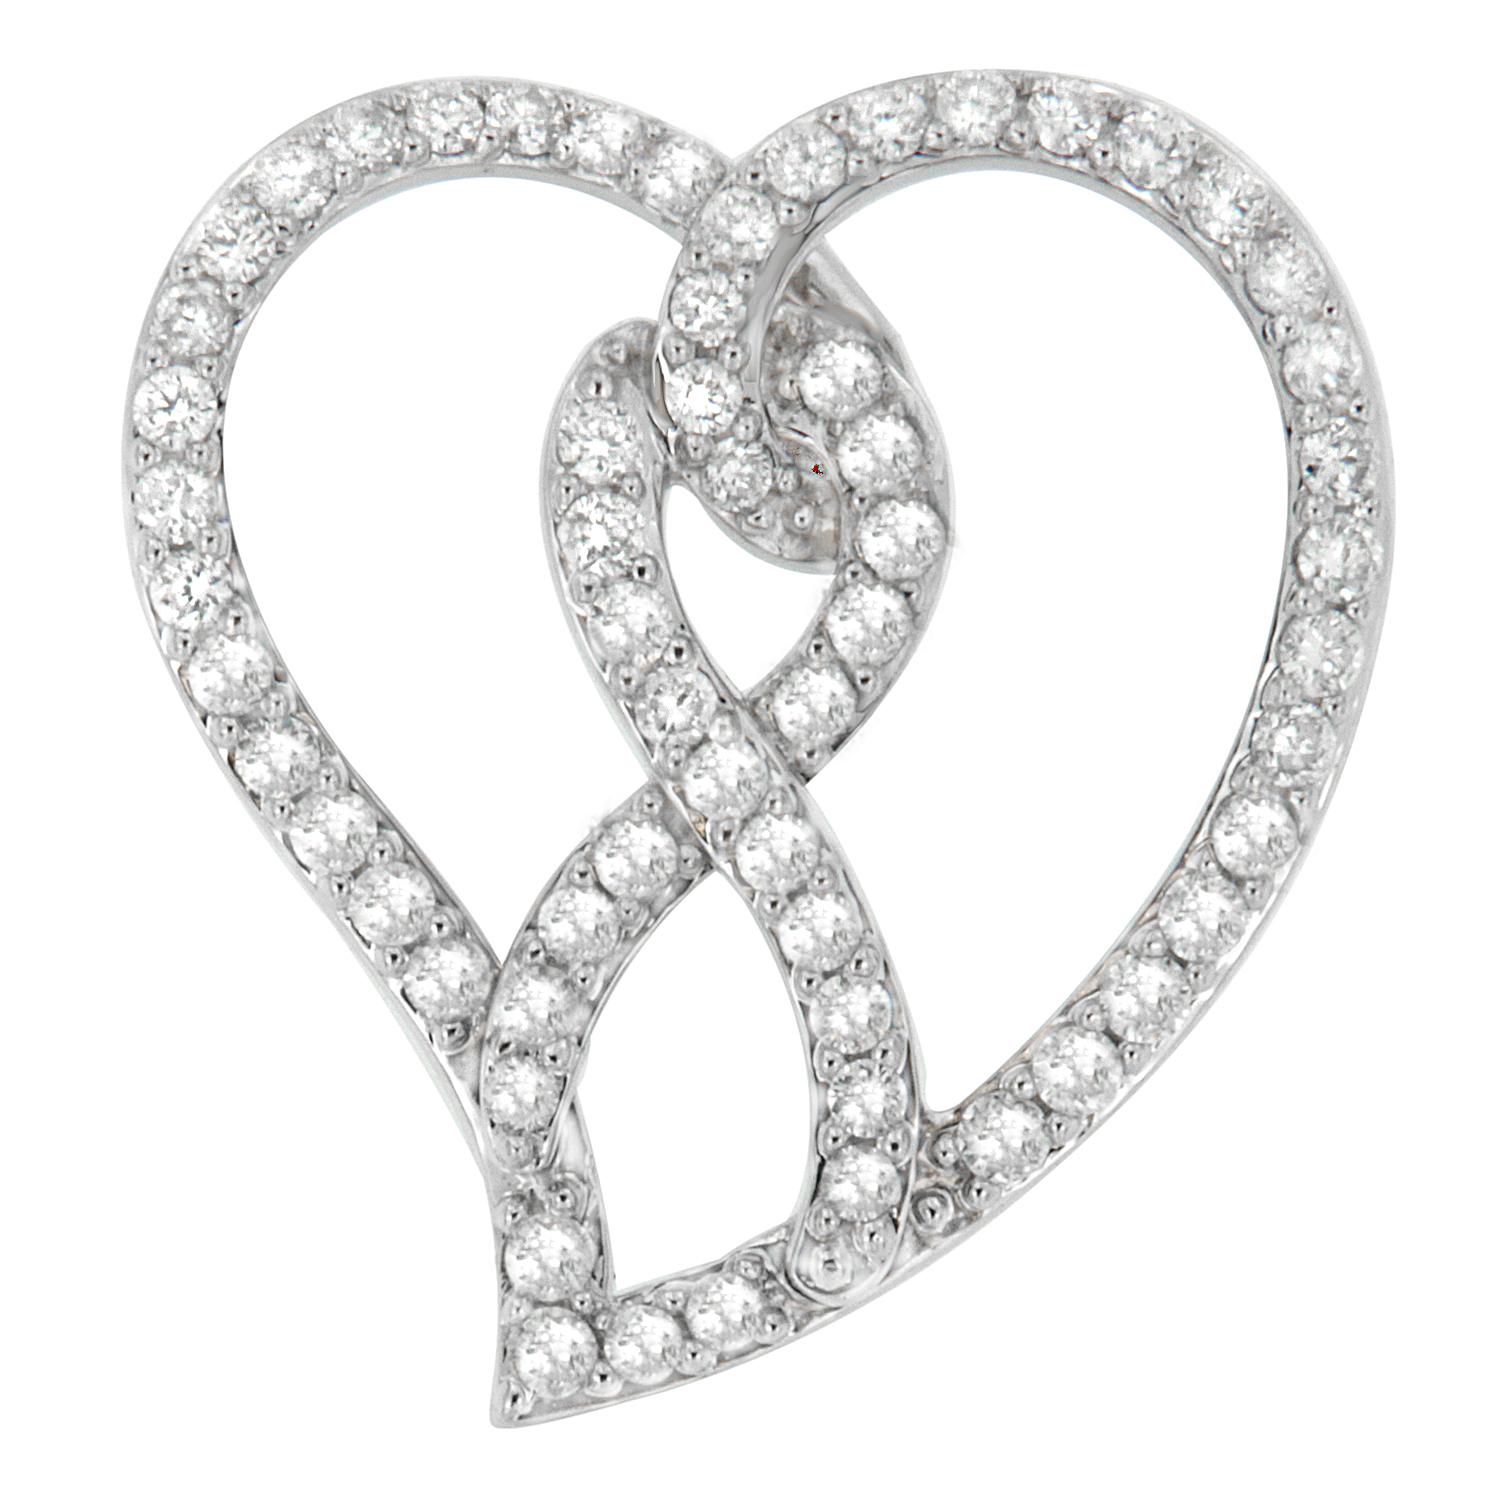 Celebrate a loved one's life with this stunning diamond pendant. Designed in the shape of a heart, and featuring bow accent in the center reminiscent of an awareness ribbon, it is crafted of 14kt white gold and polished high to shine. Choose an